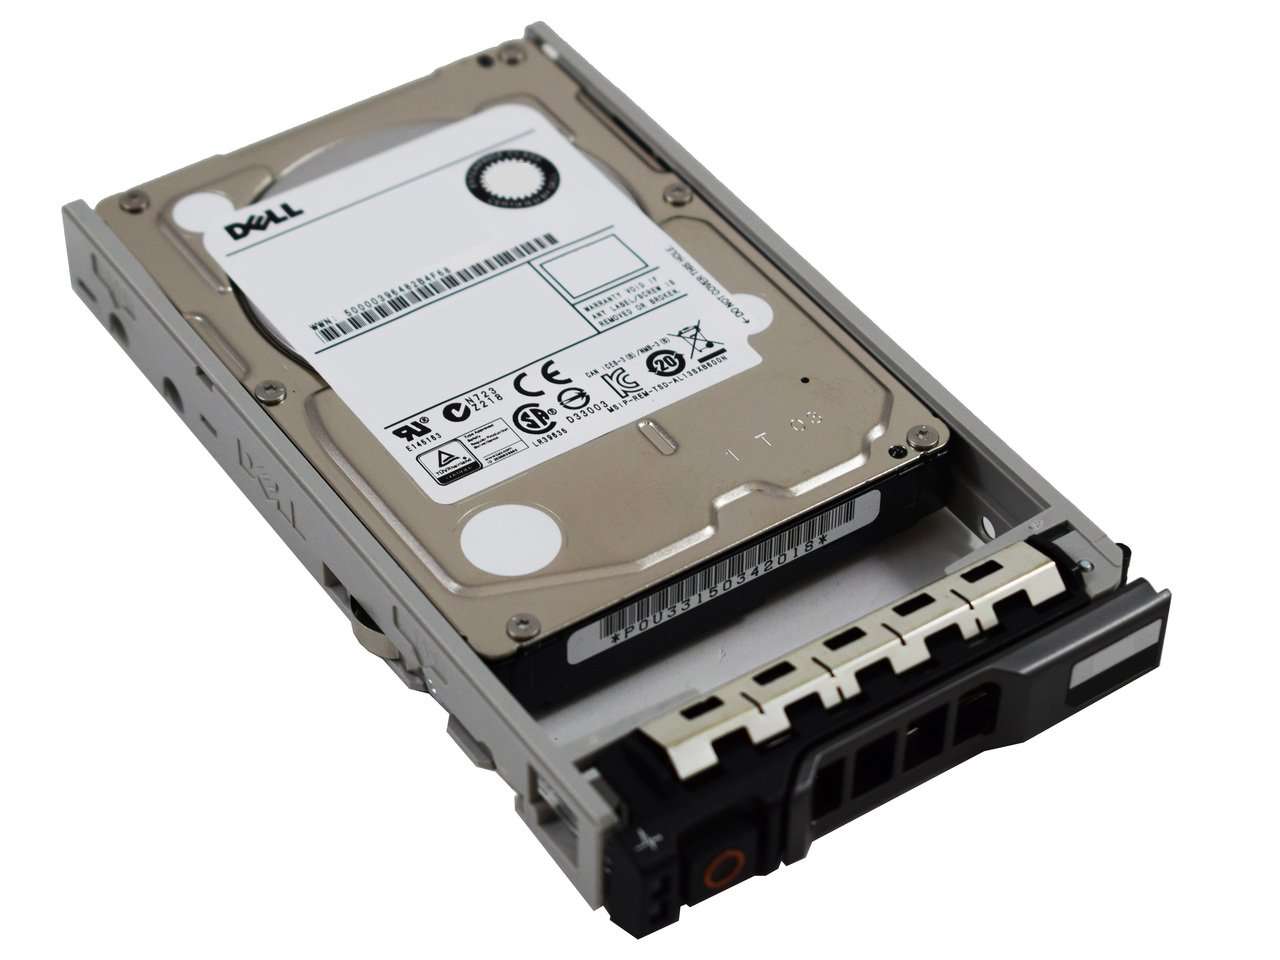 Dell G13 400-22399 600GB 10K RPM SAS 6Gb/s 512n 2.5" Manufacturer Recertified HDD